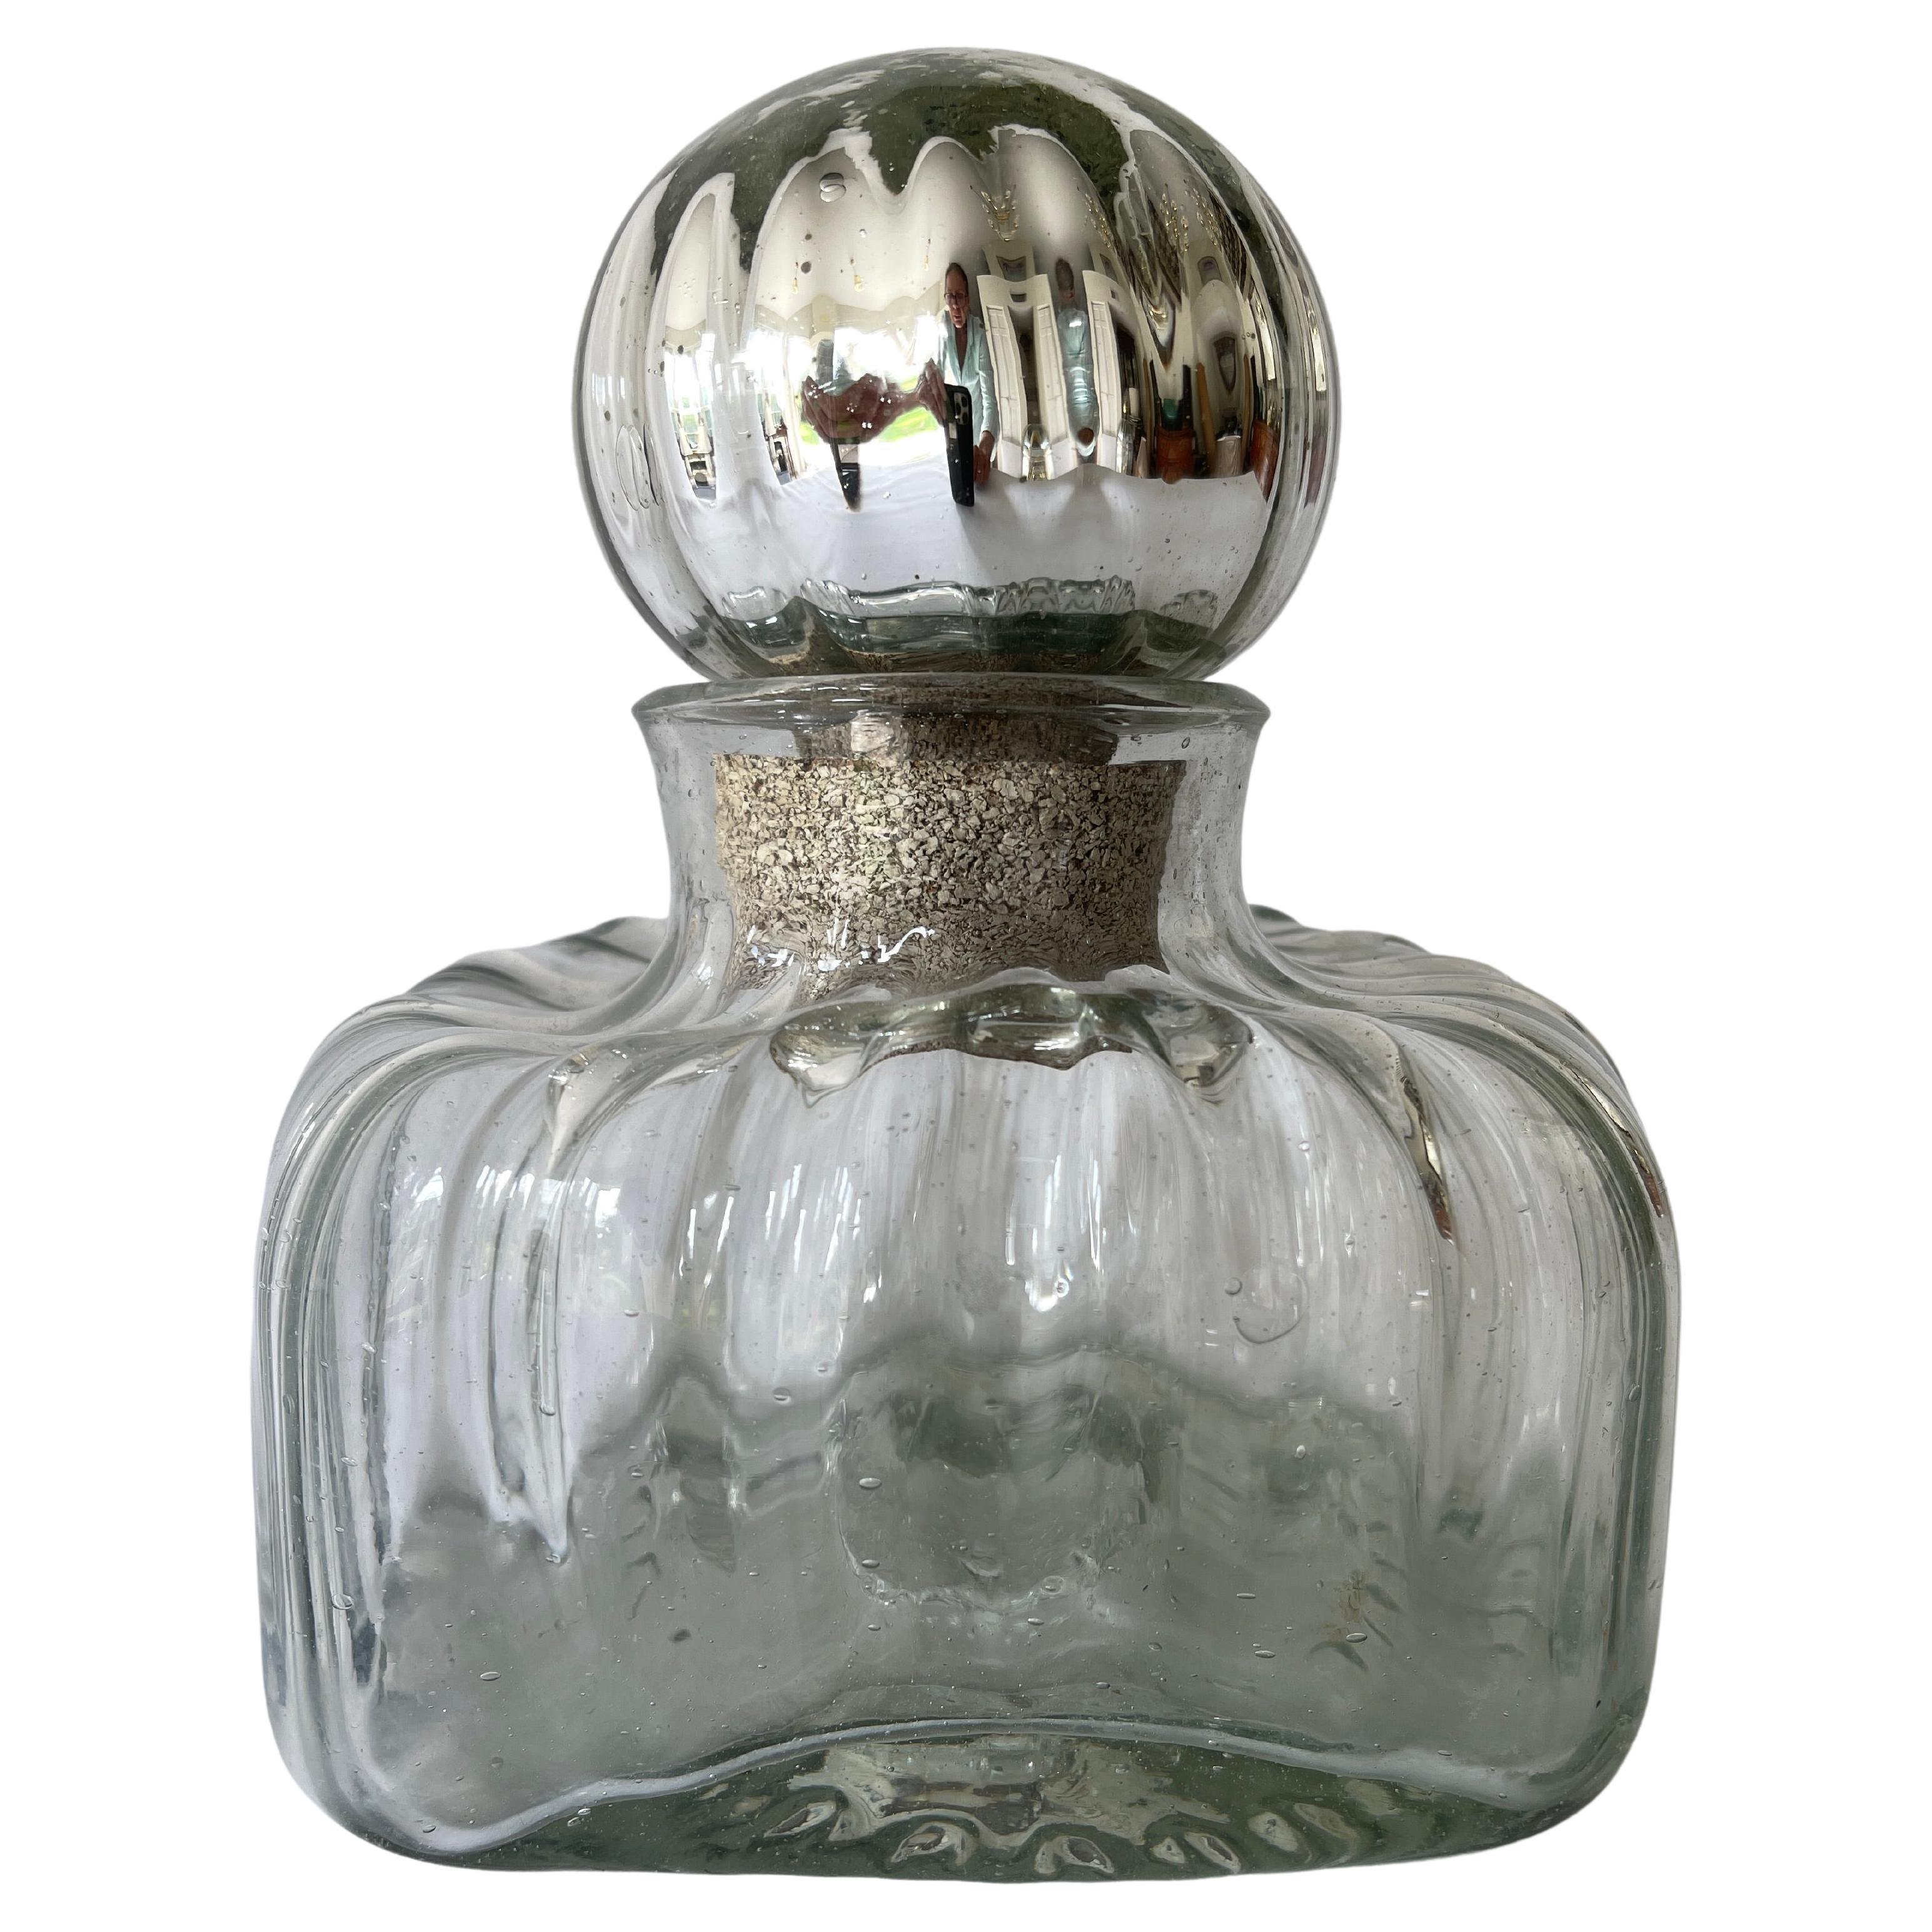 1980's Mexican Hand Blown Glass Decanter with Mercury Glass Sphere Stopper